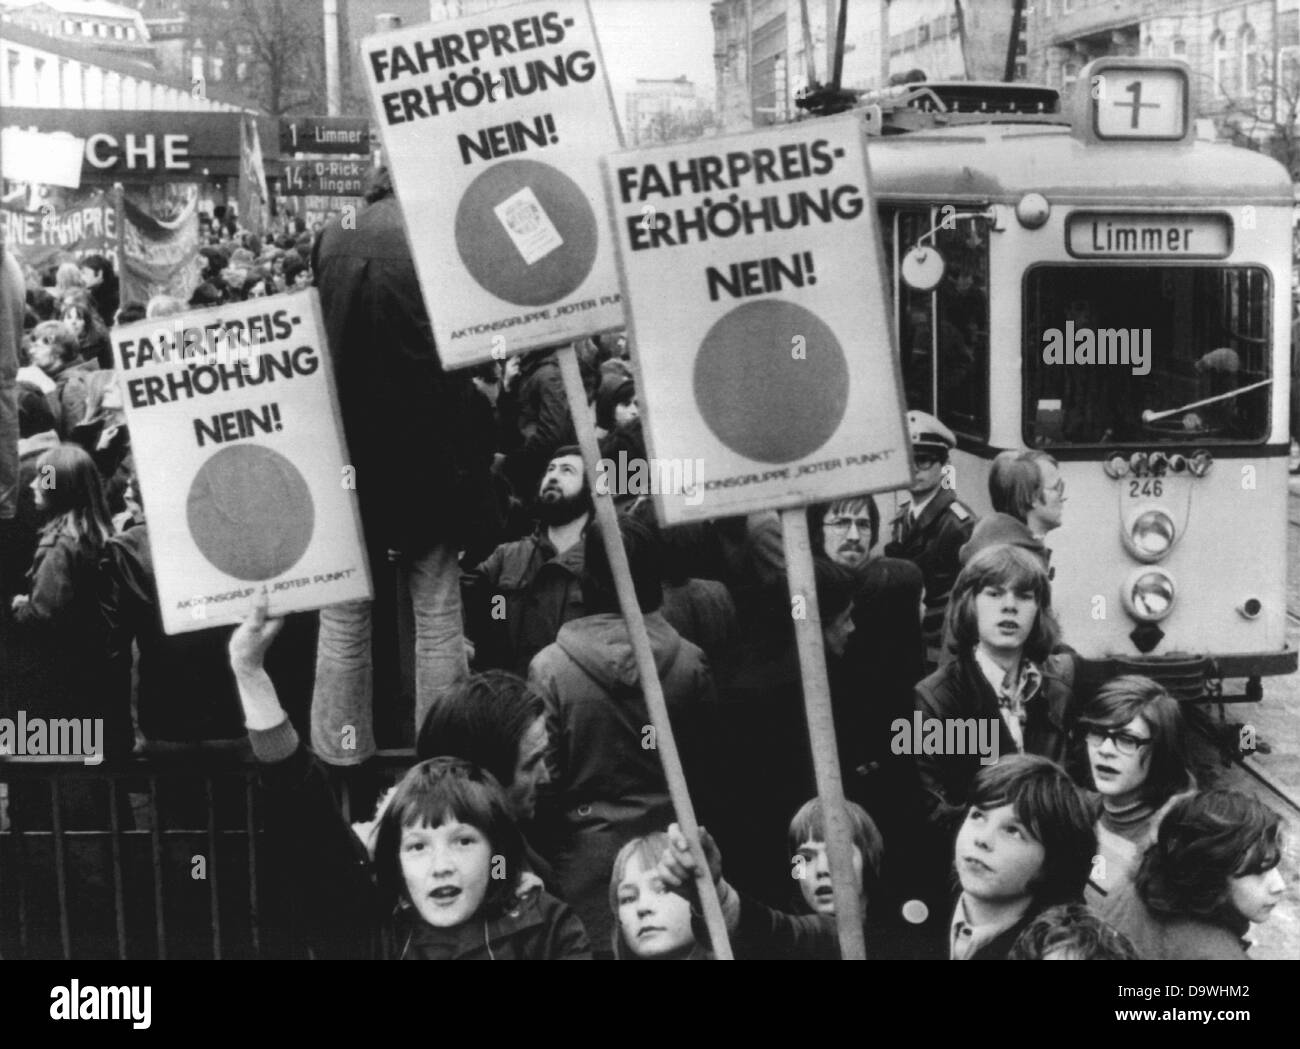 About 4,000 mainly young demonstrators protest against a fare increase in the local traffic on the 1st of April in 1970. Stock Photo